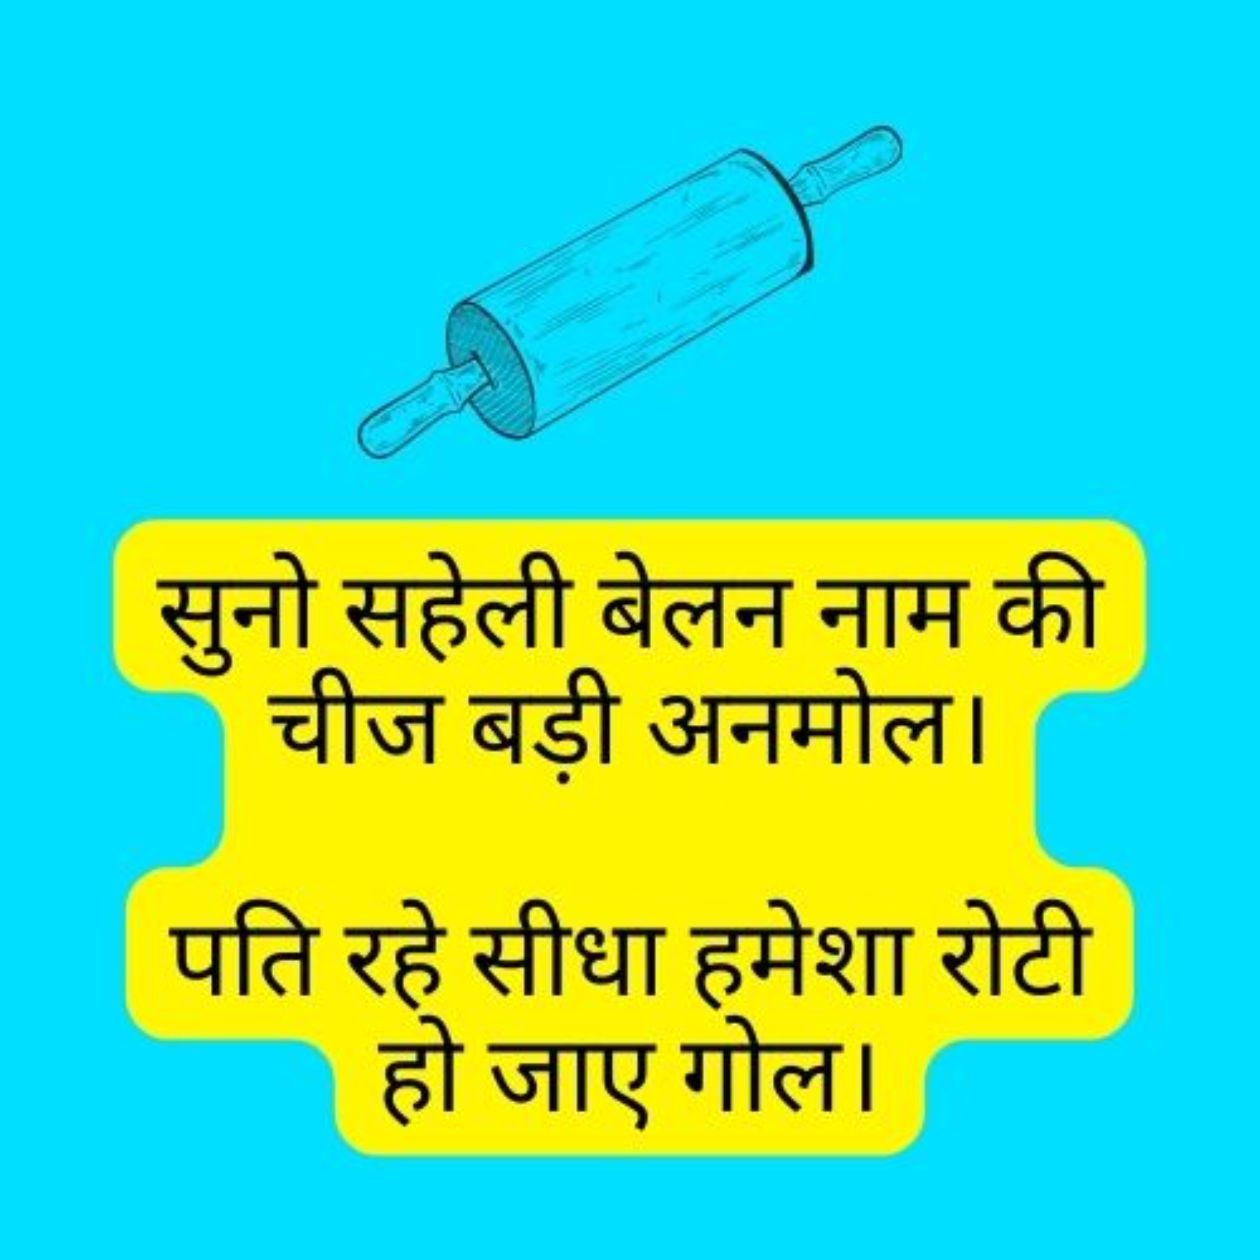 A rolling pin animation and funny text in Hindi by a woman about her husband.